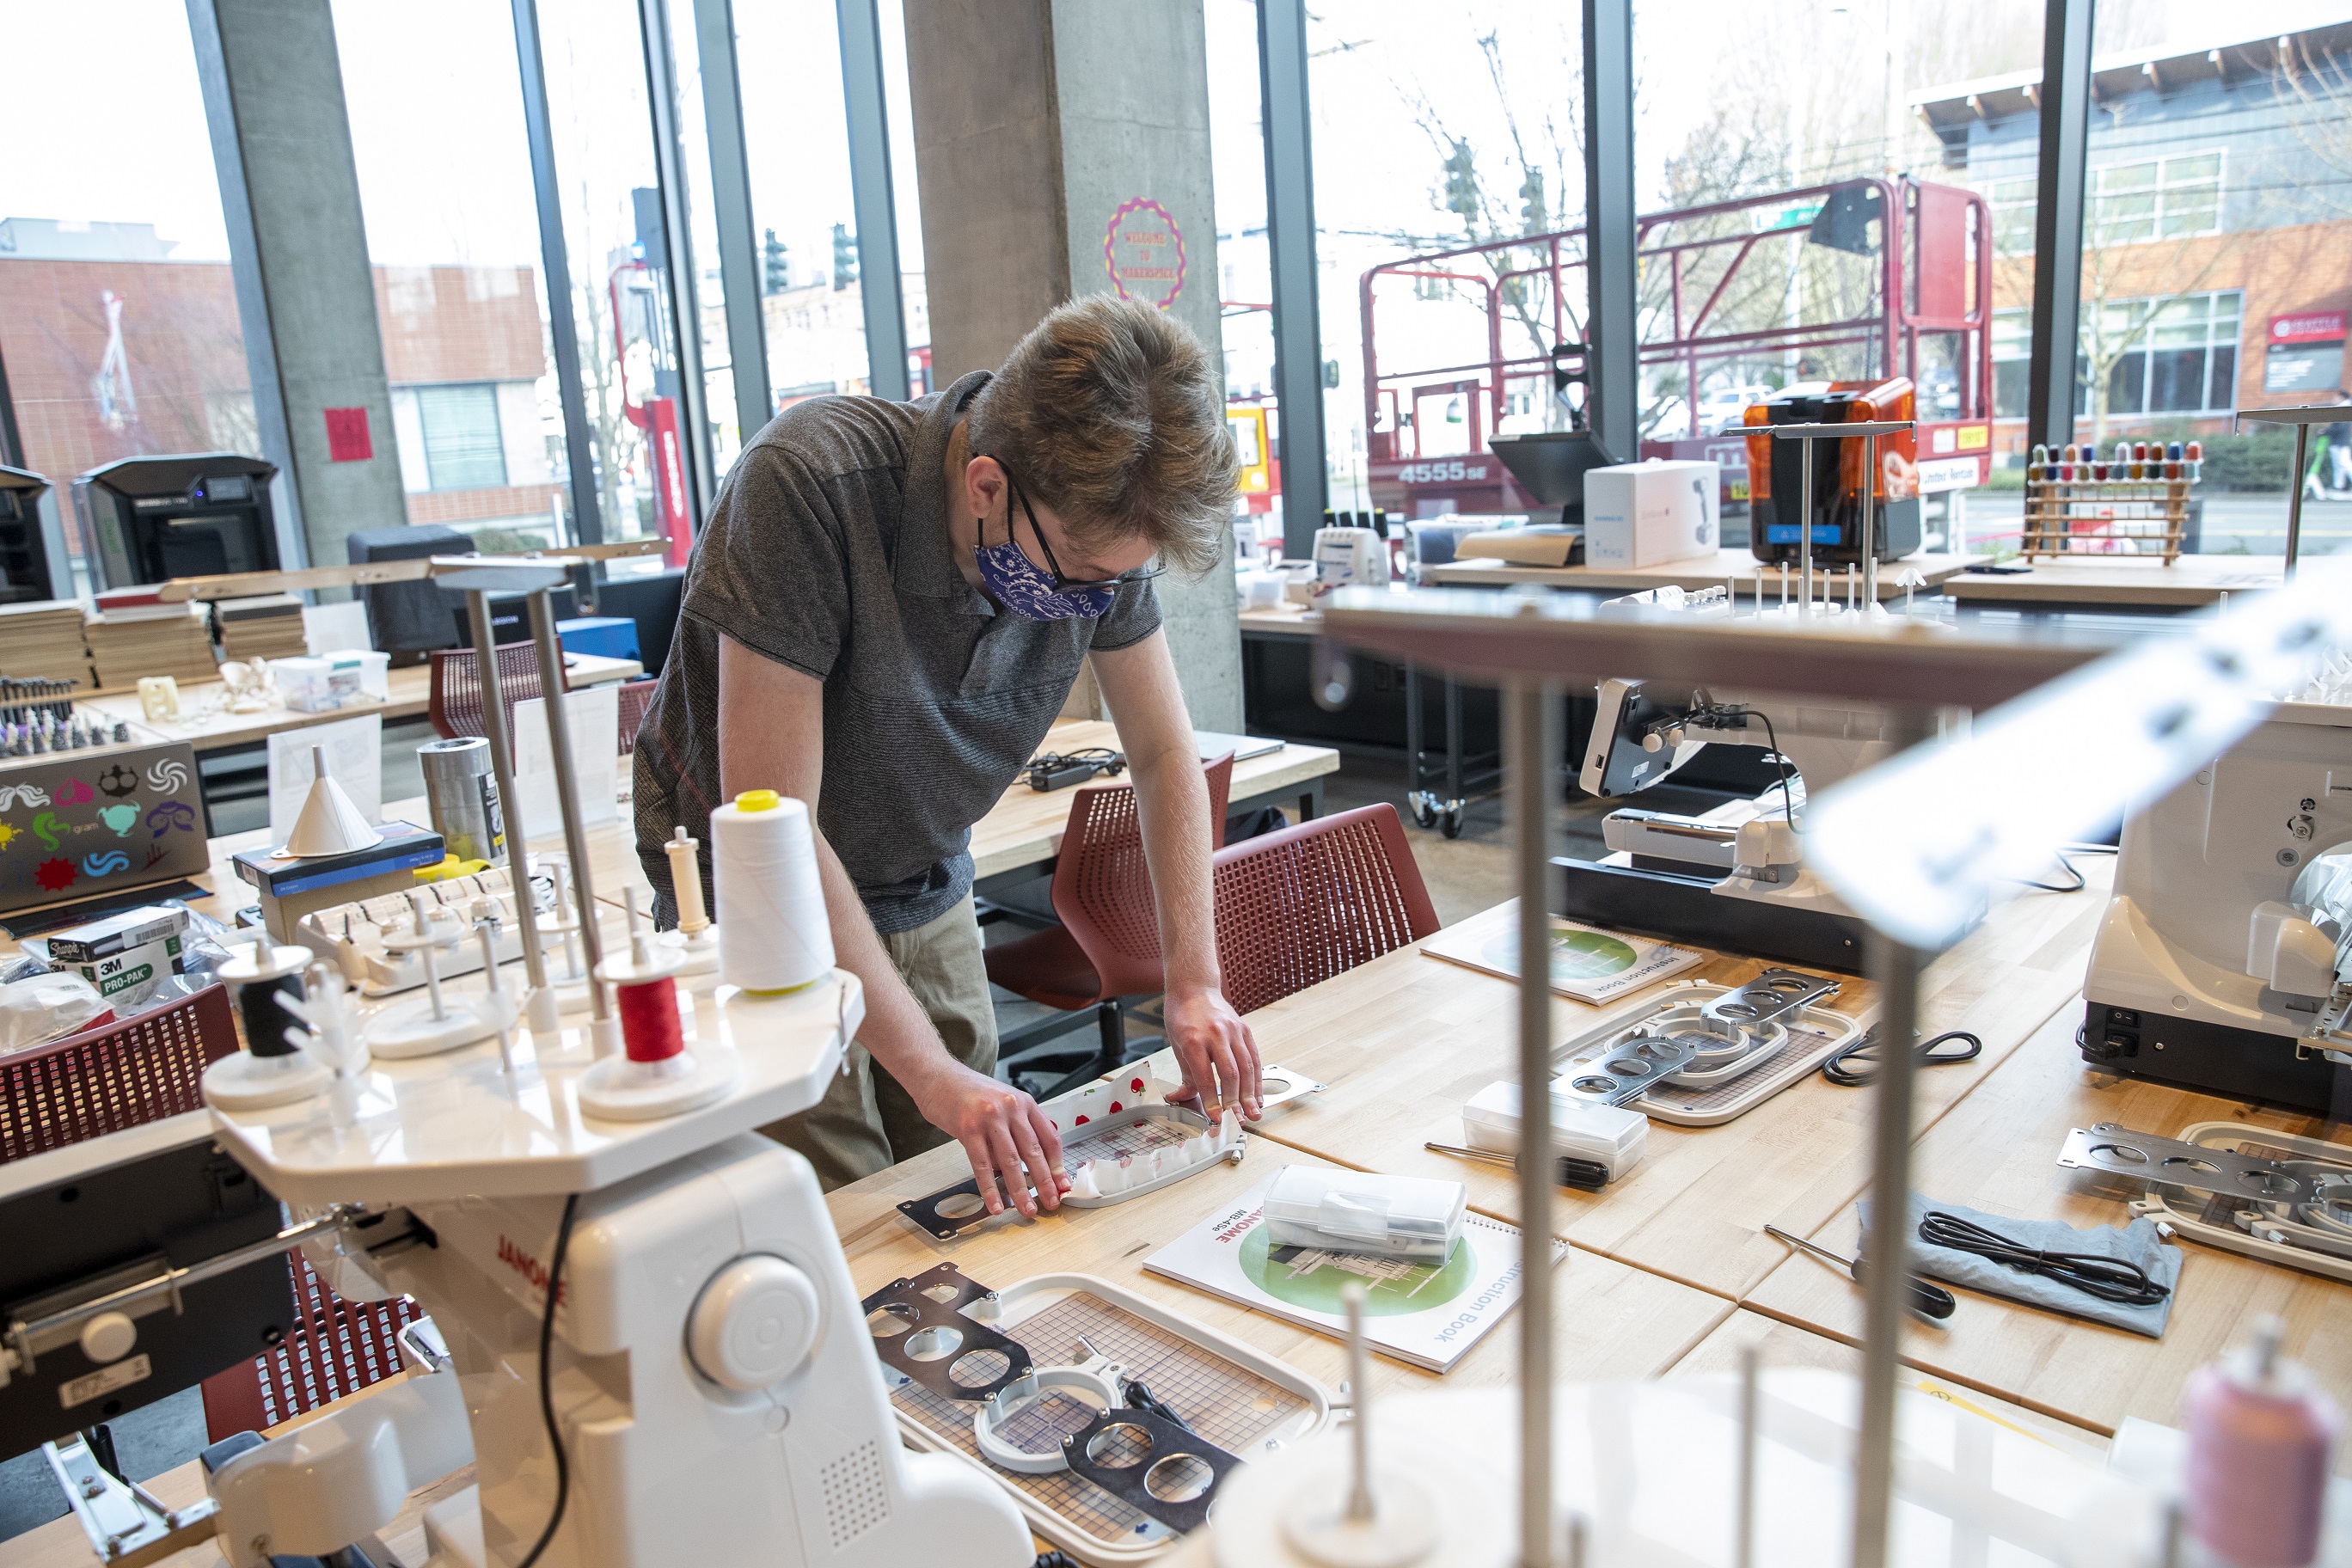 Male student standing at a work table in the makerspace